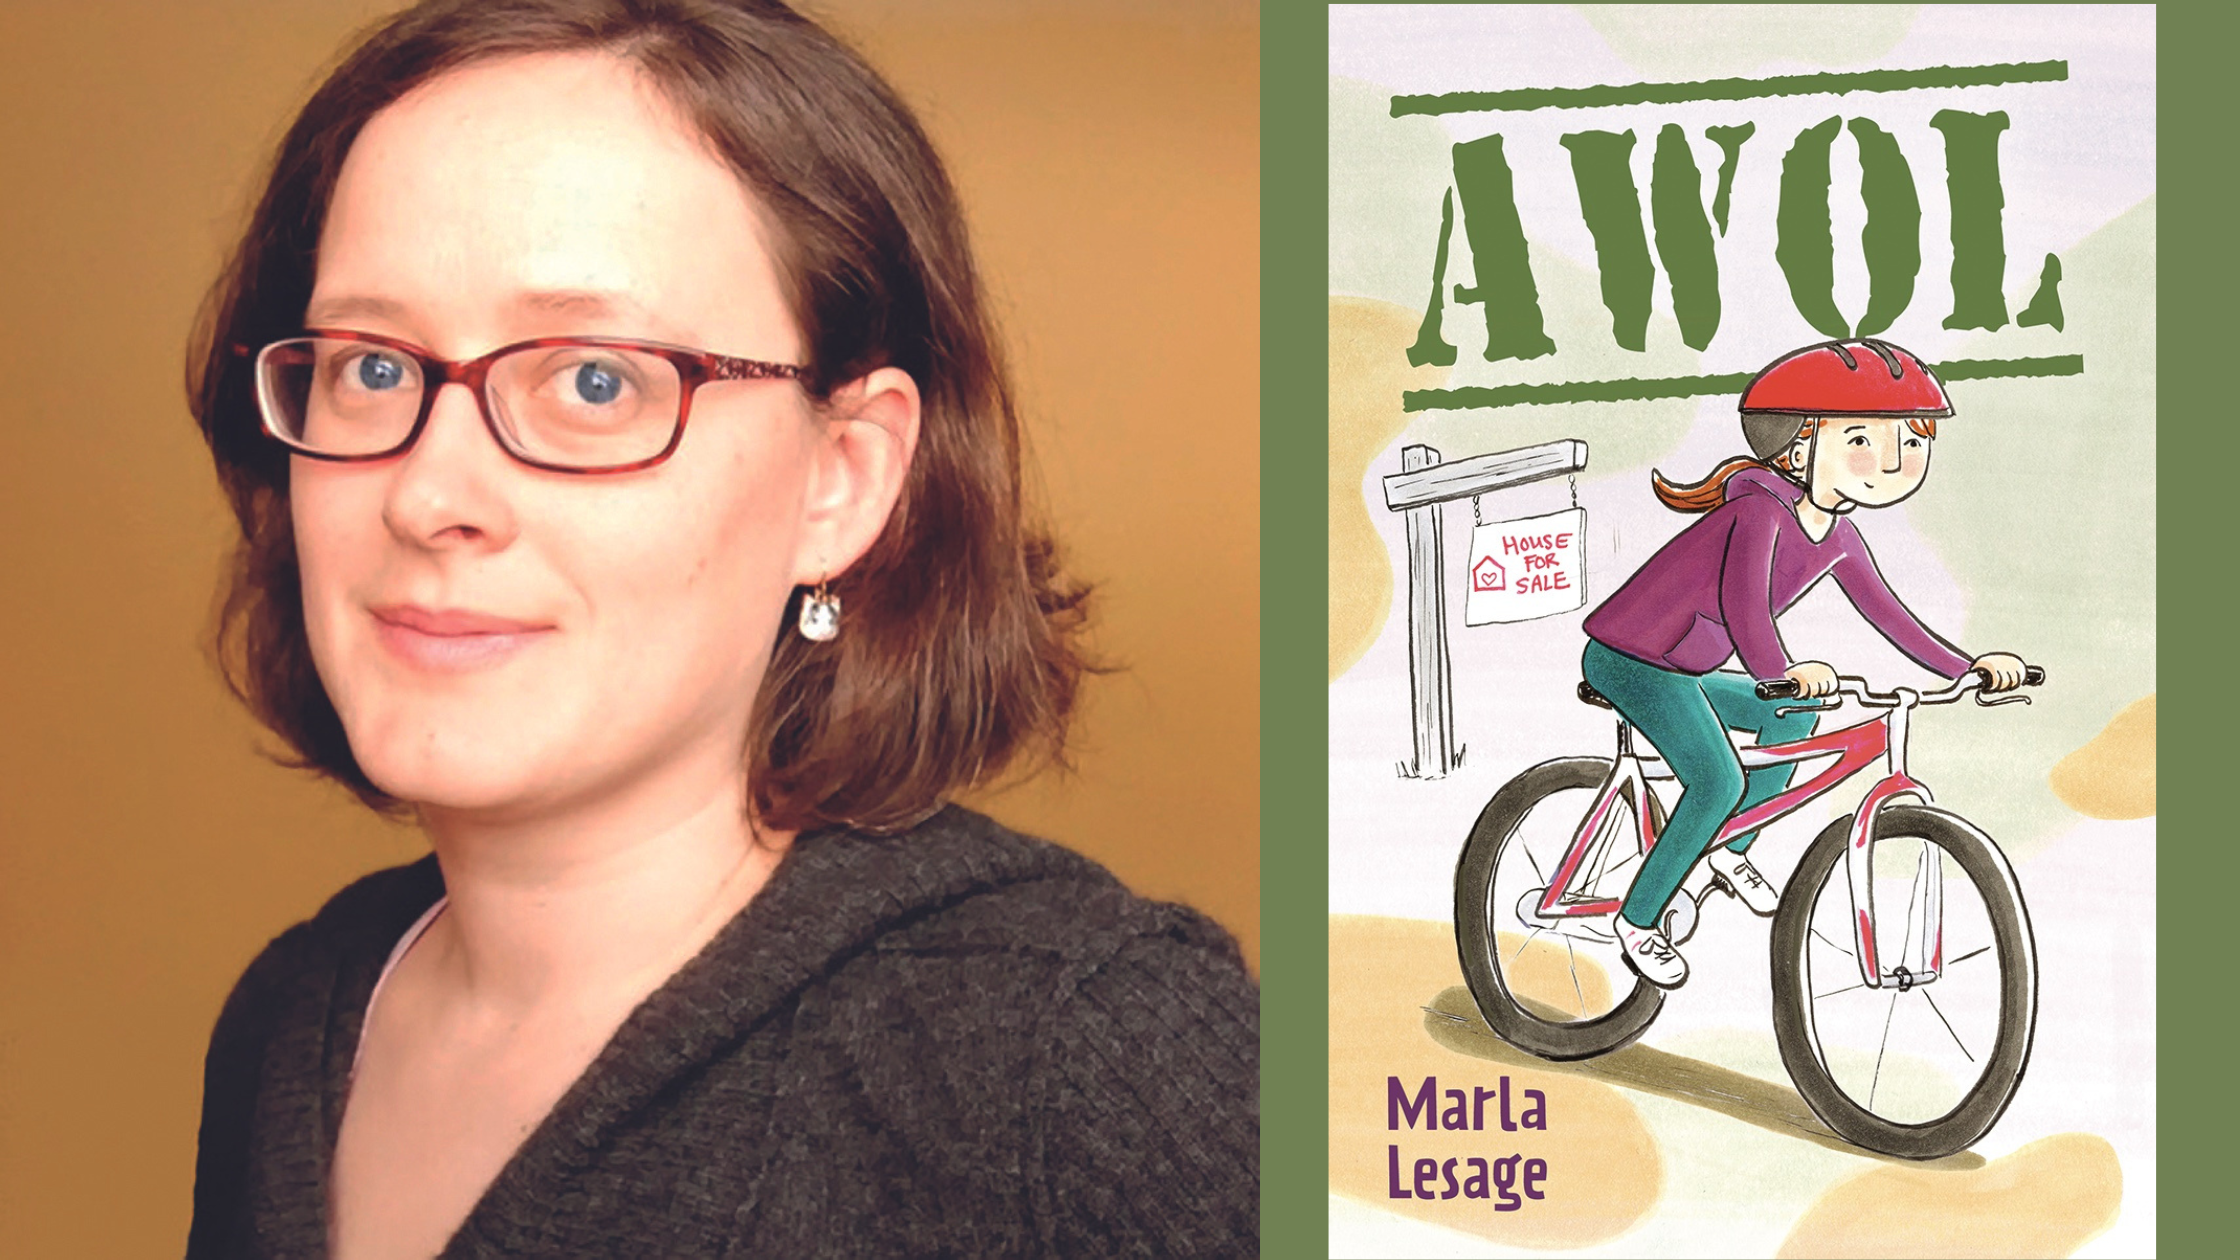 Q&A with AWOL author Marla Lesage